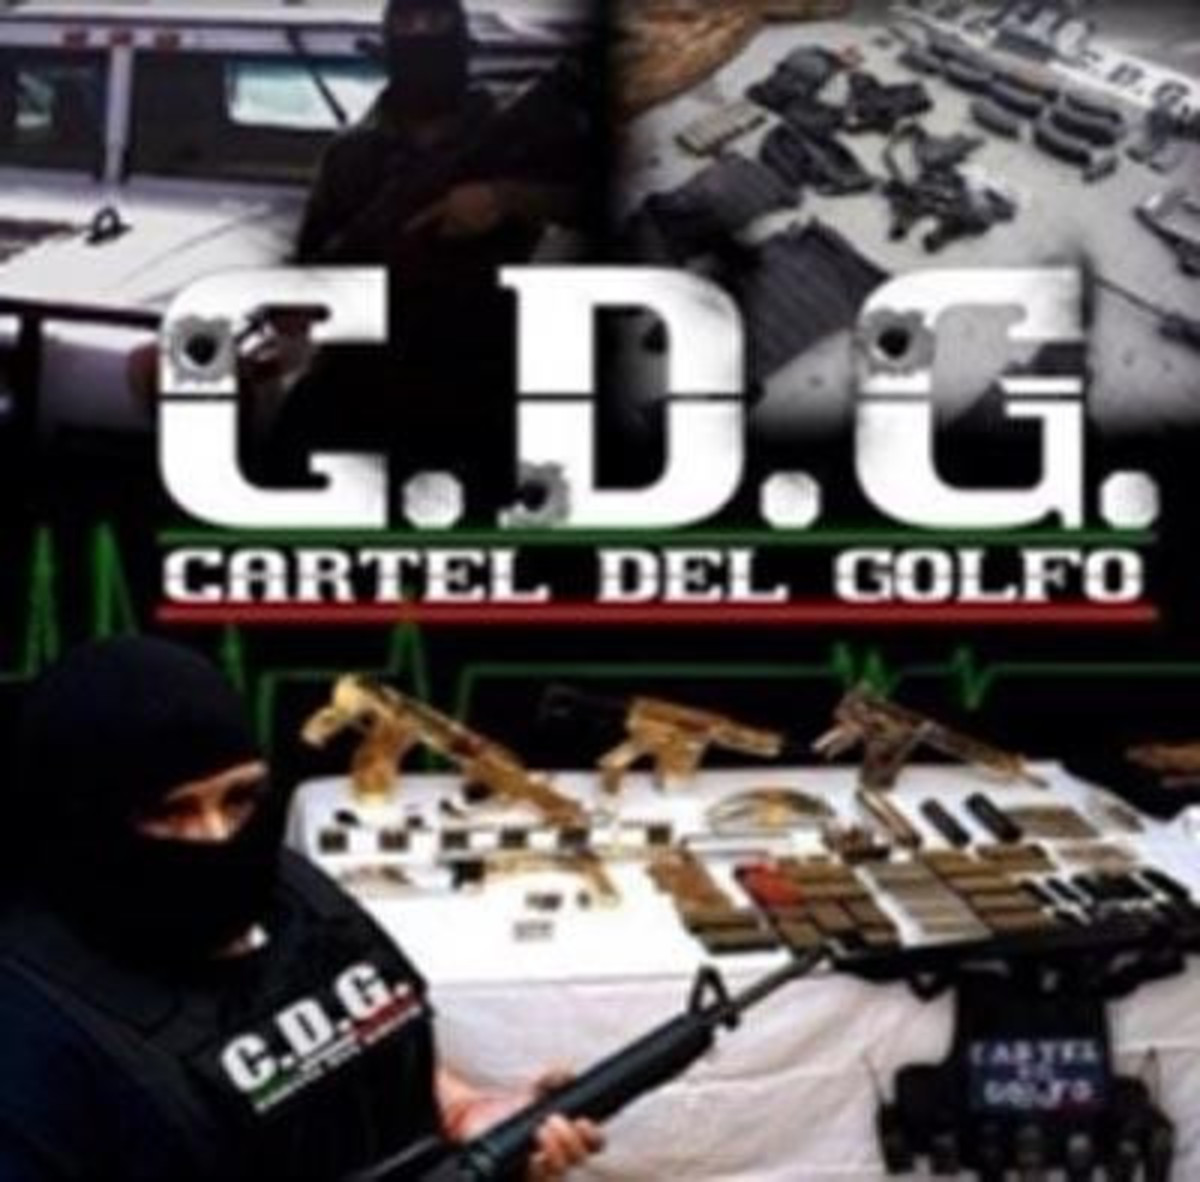 Instagram account launched in Gulf Cartel's name | KVEO-TV